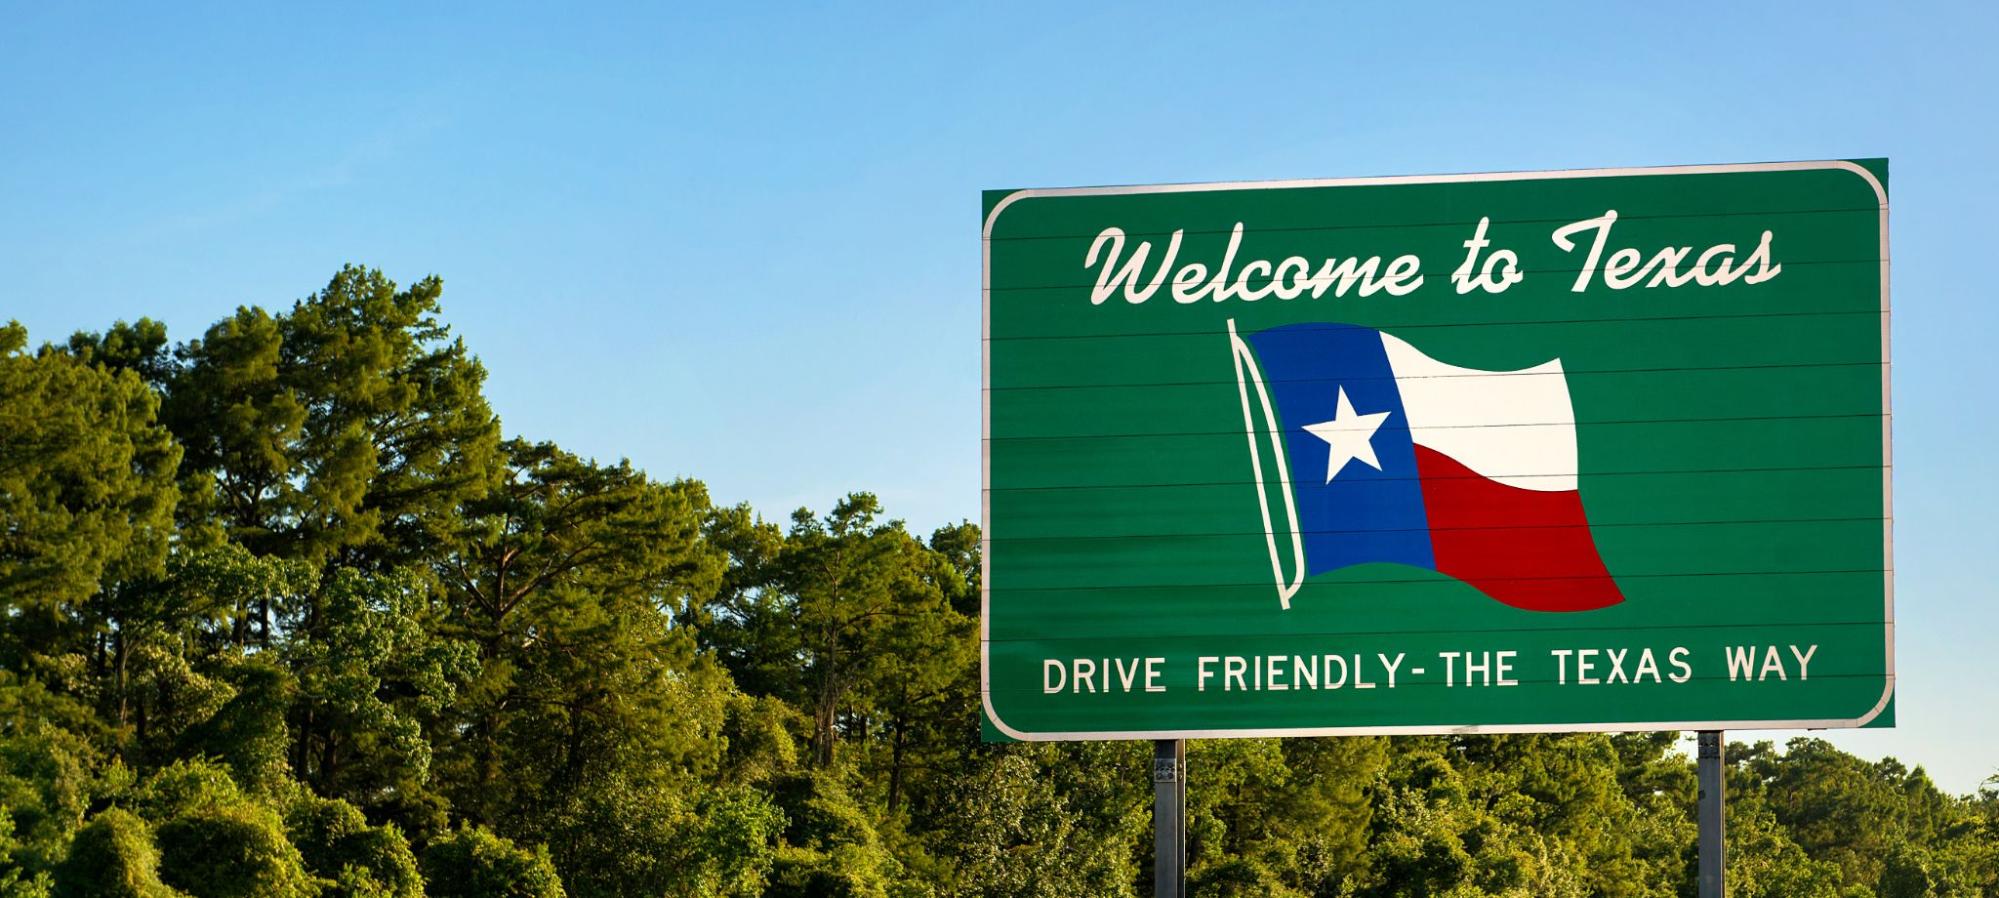 A green sign welcomes drivers to Texas.